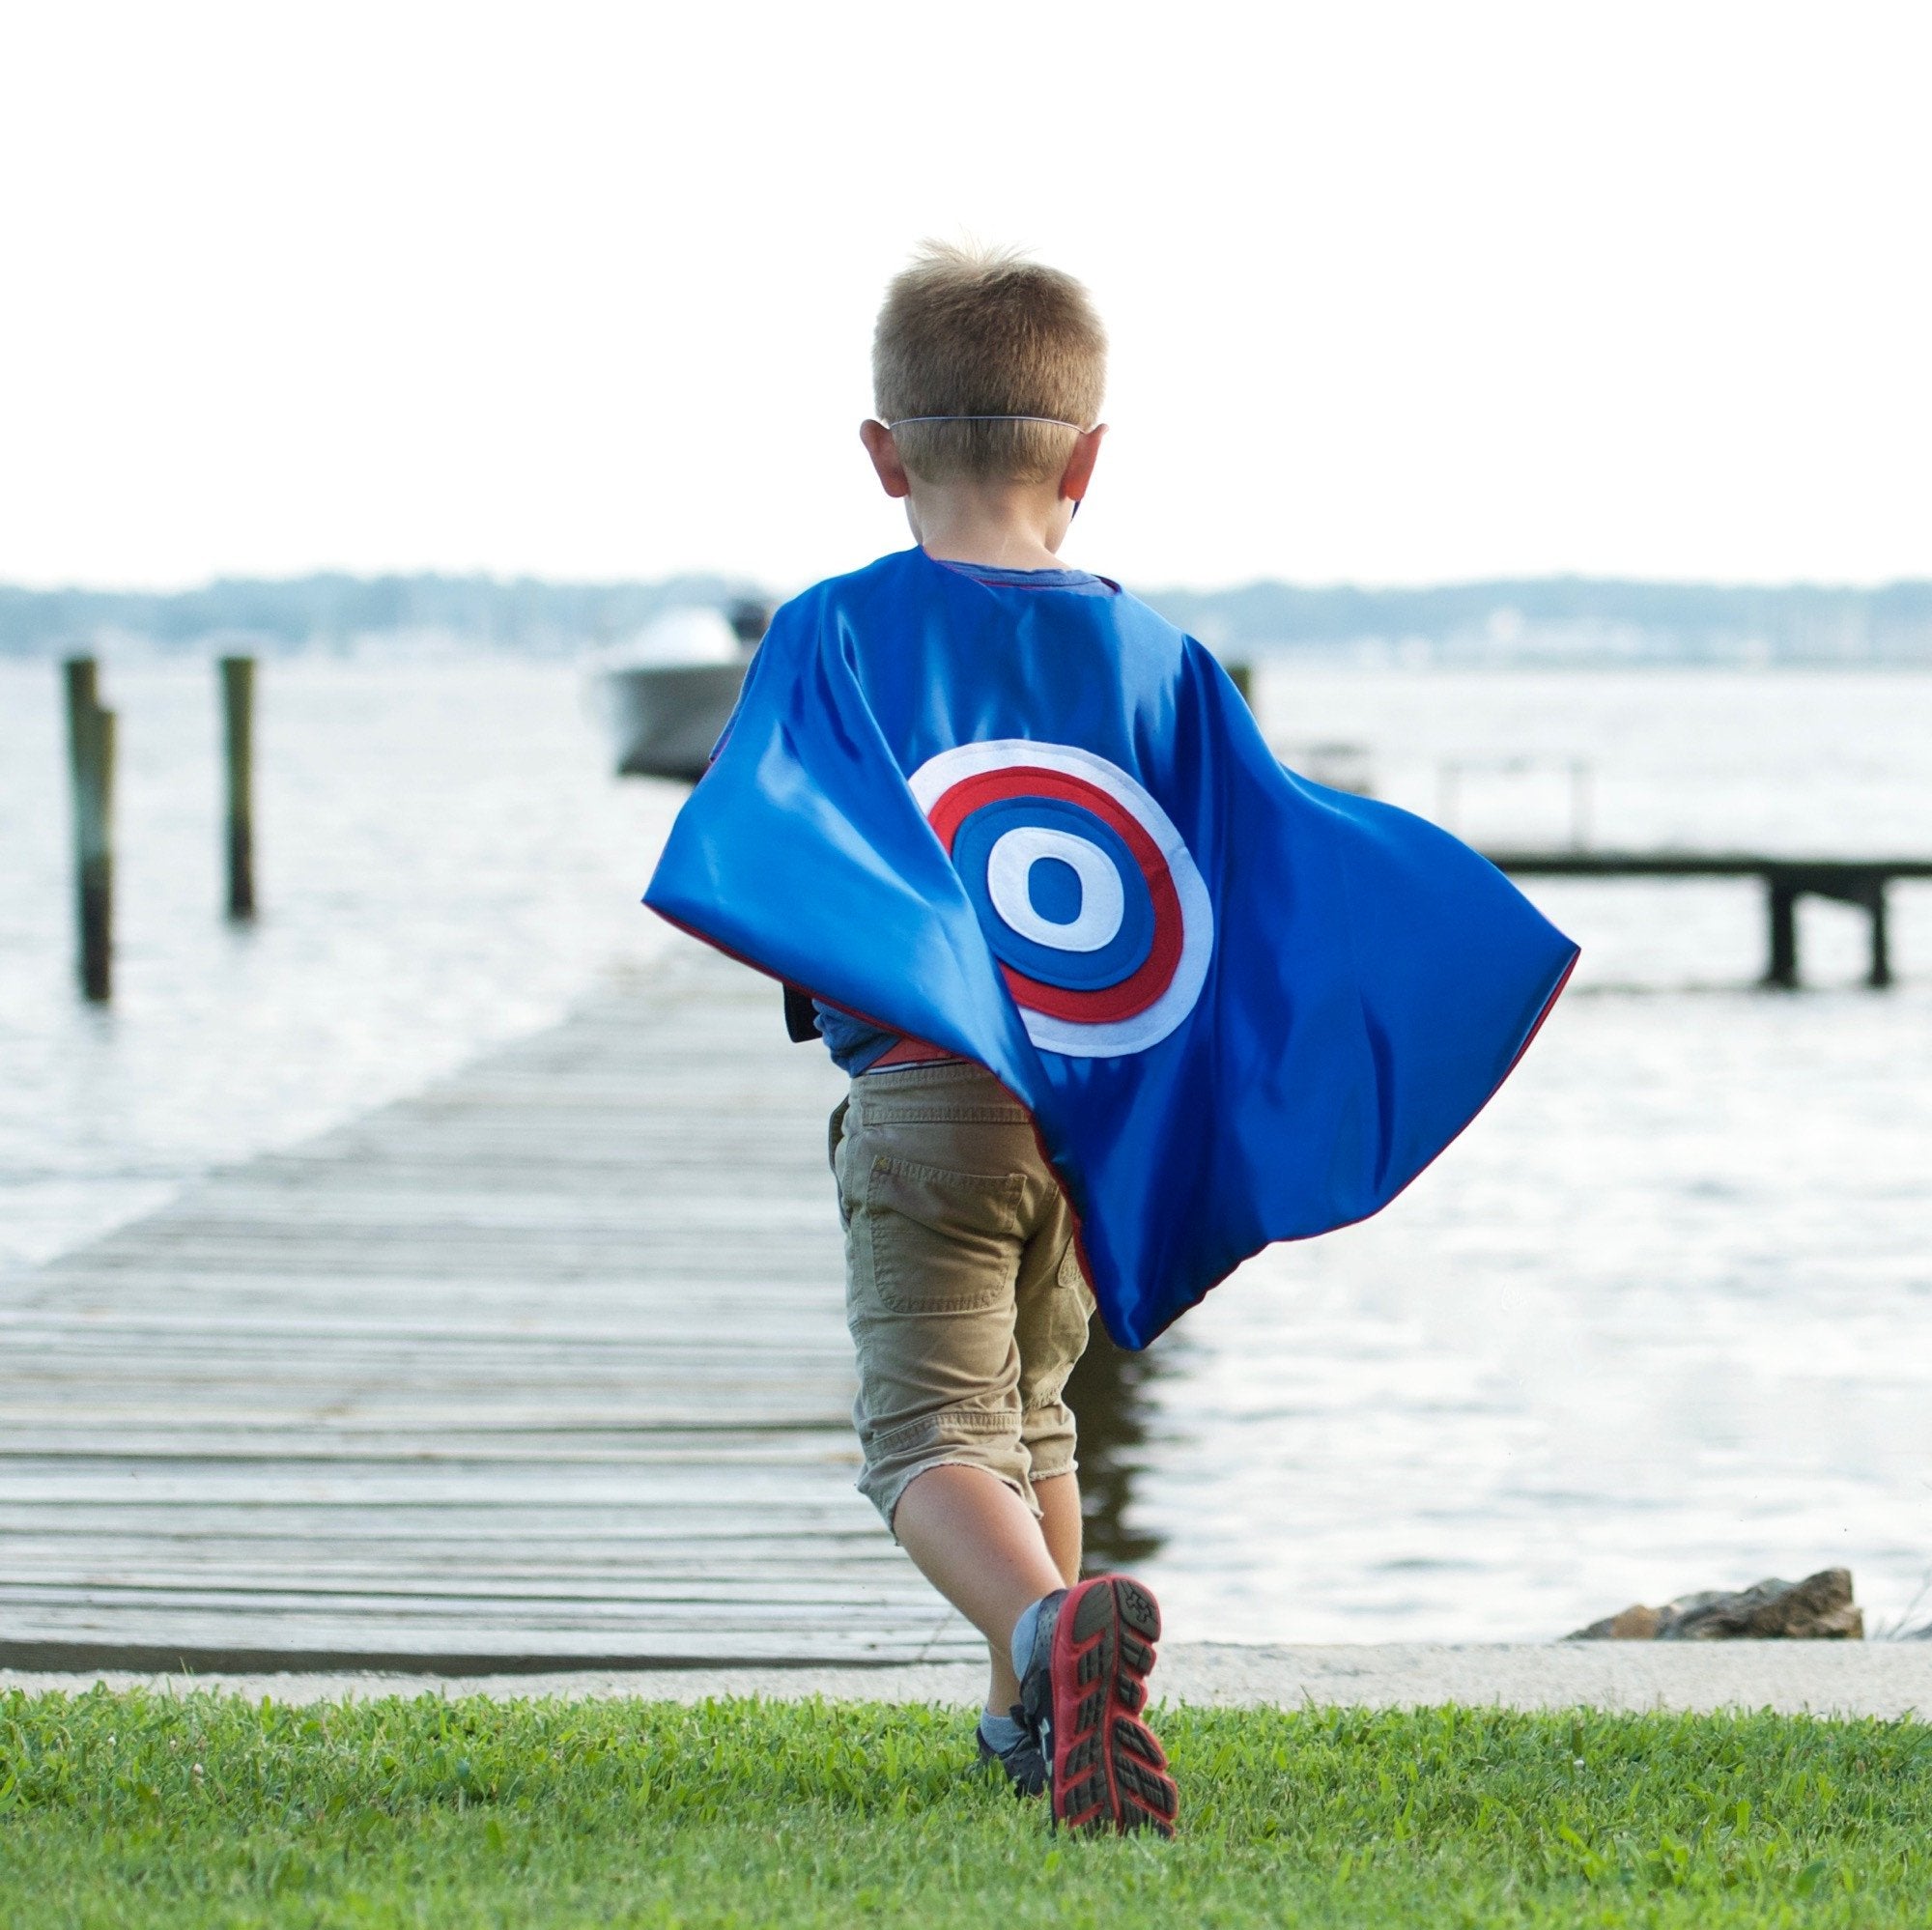 Kid's Initial Cape - Red, White and Blue - Creative Capes